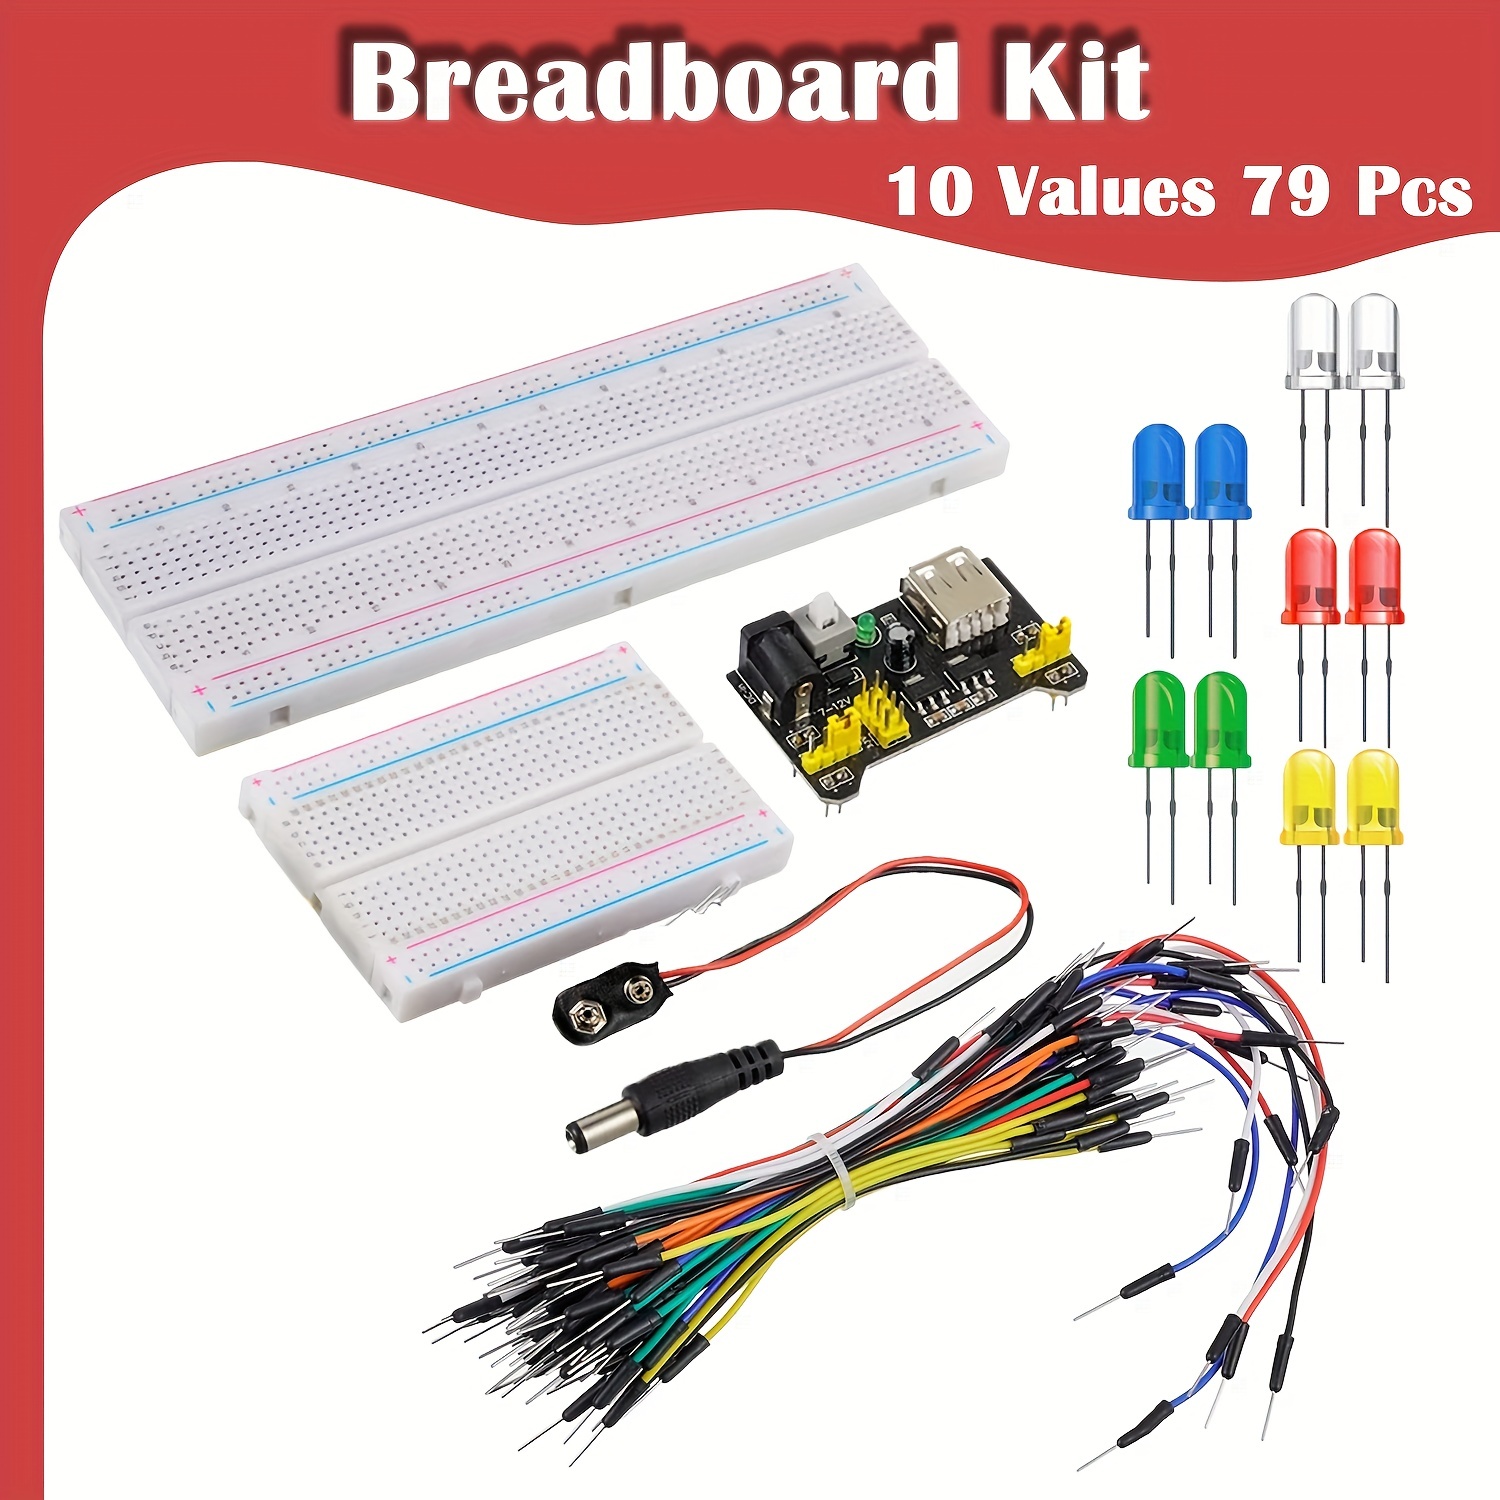 79pcs Breadboard Kit With Power Supply Module,LED Light Diodes, Jumper  Wires,Battery Clip,830 & 400 Tie-Points Breadboard